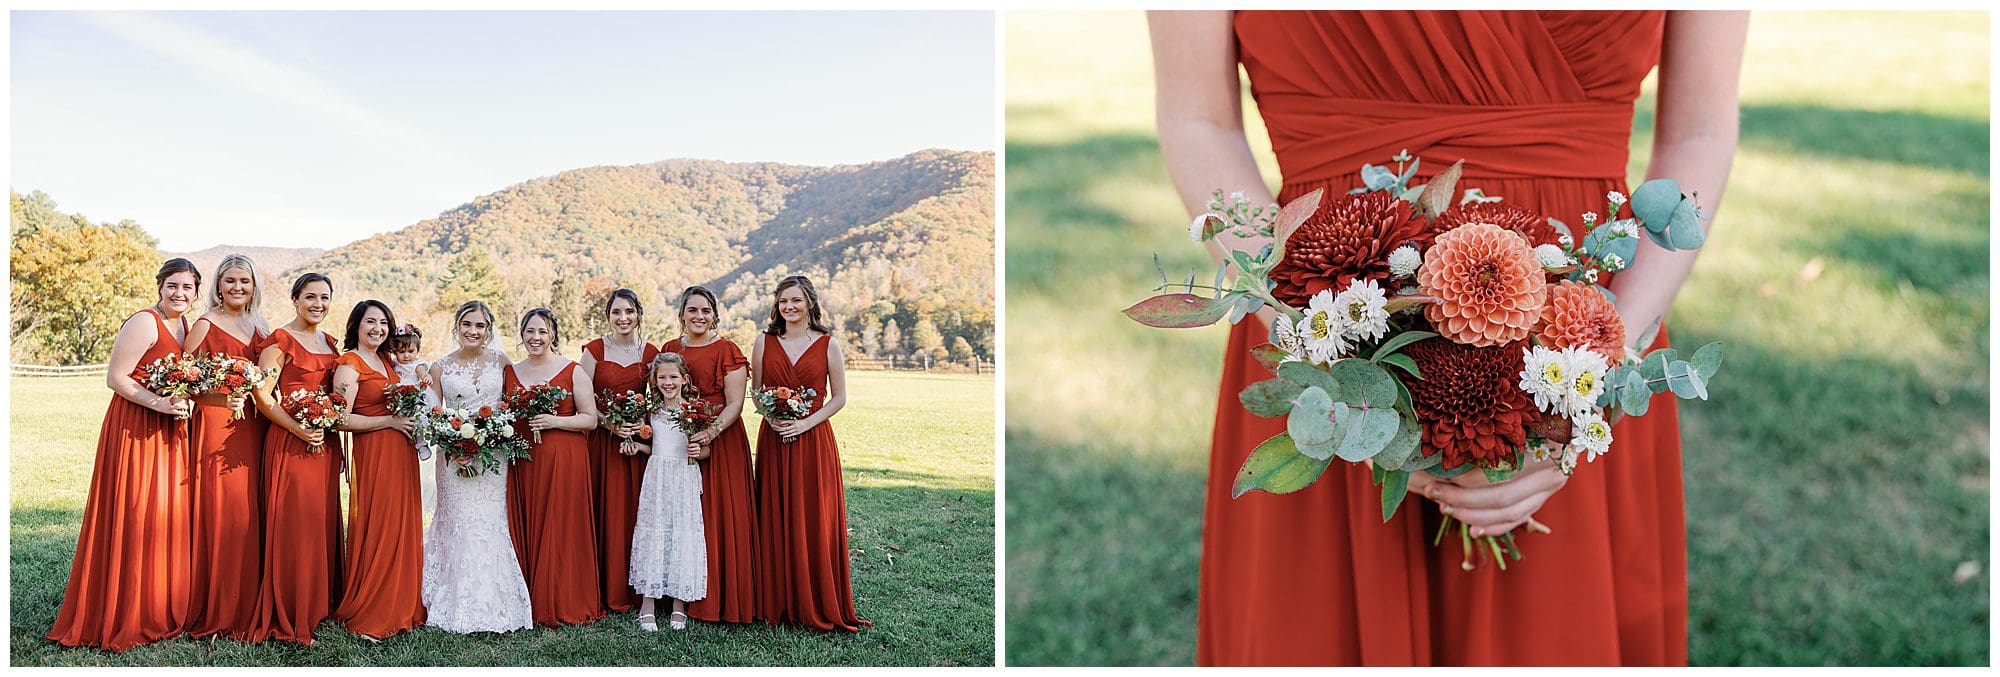 Left: a bride and bridesmaids in red dresses posing in a grassy field with hills in the background. right: close-up of a bridesmaid holding a bouquet with red and orange flowers.